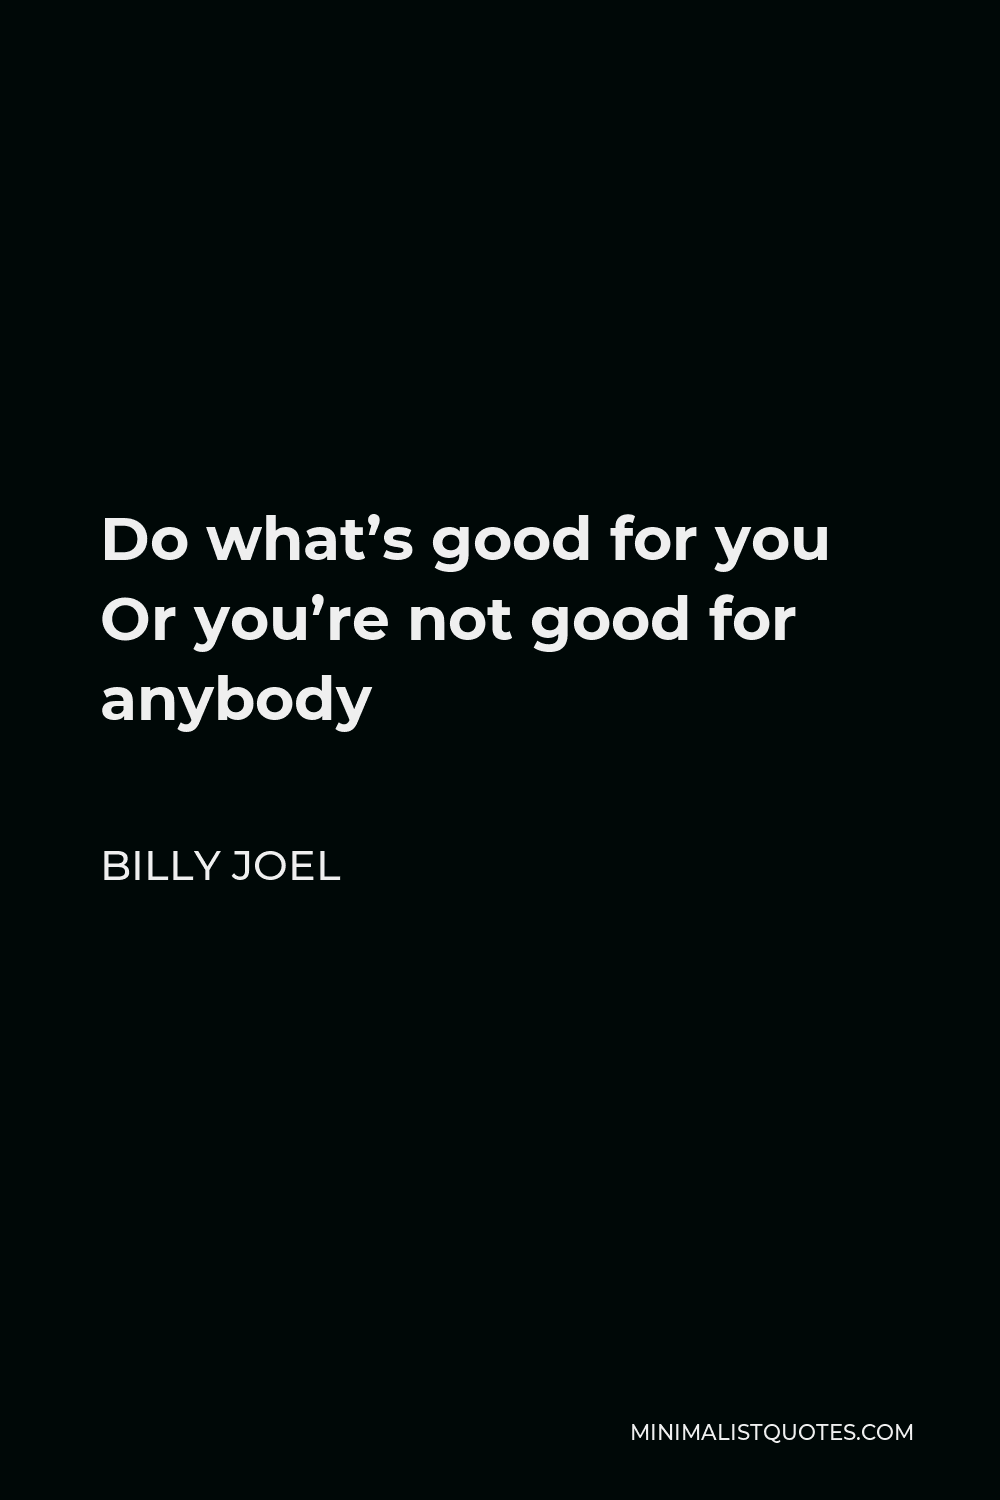 Billy Joel Quote - Do what’s good for you Or you’re not good for anybody